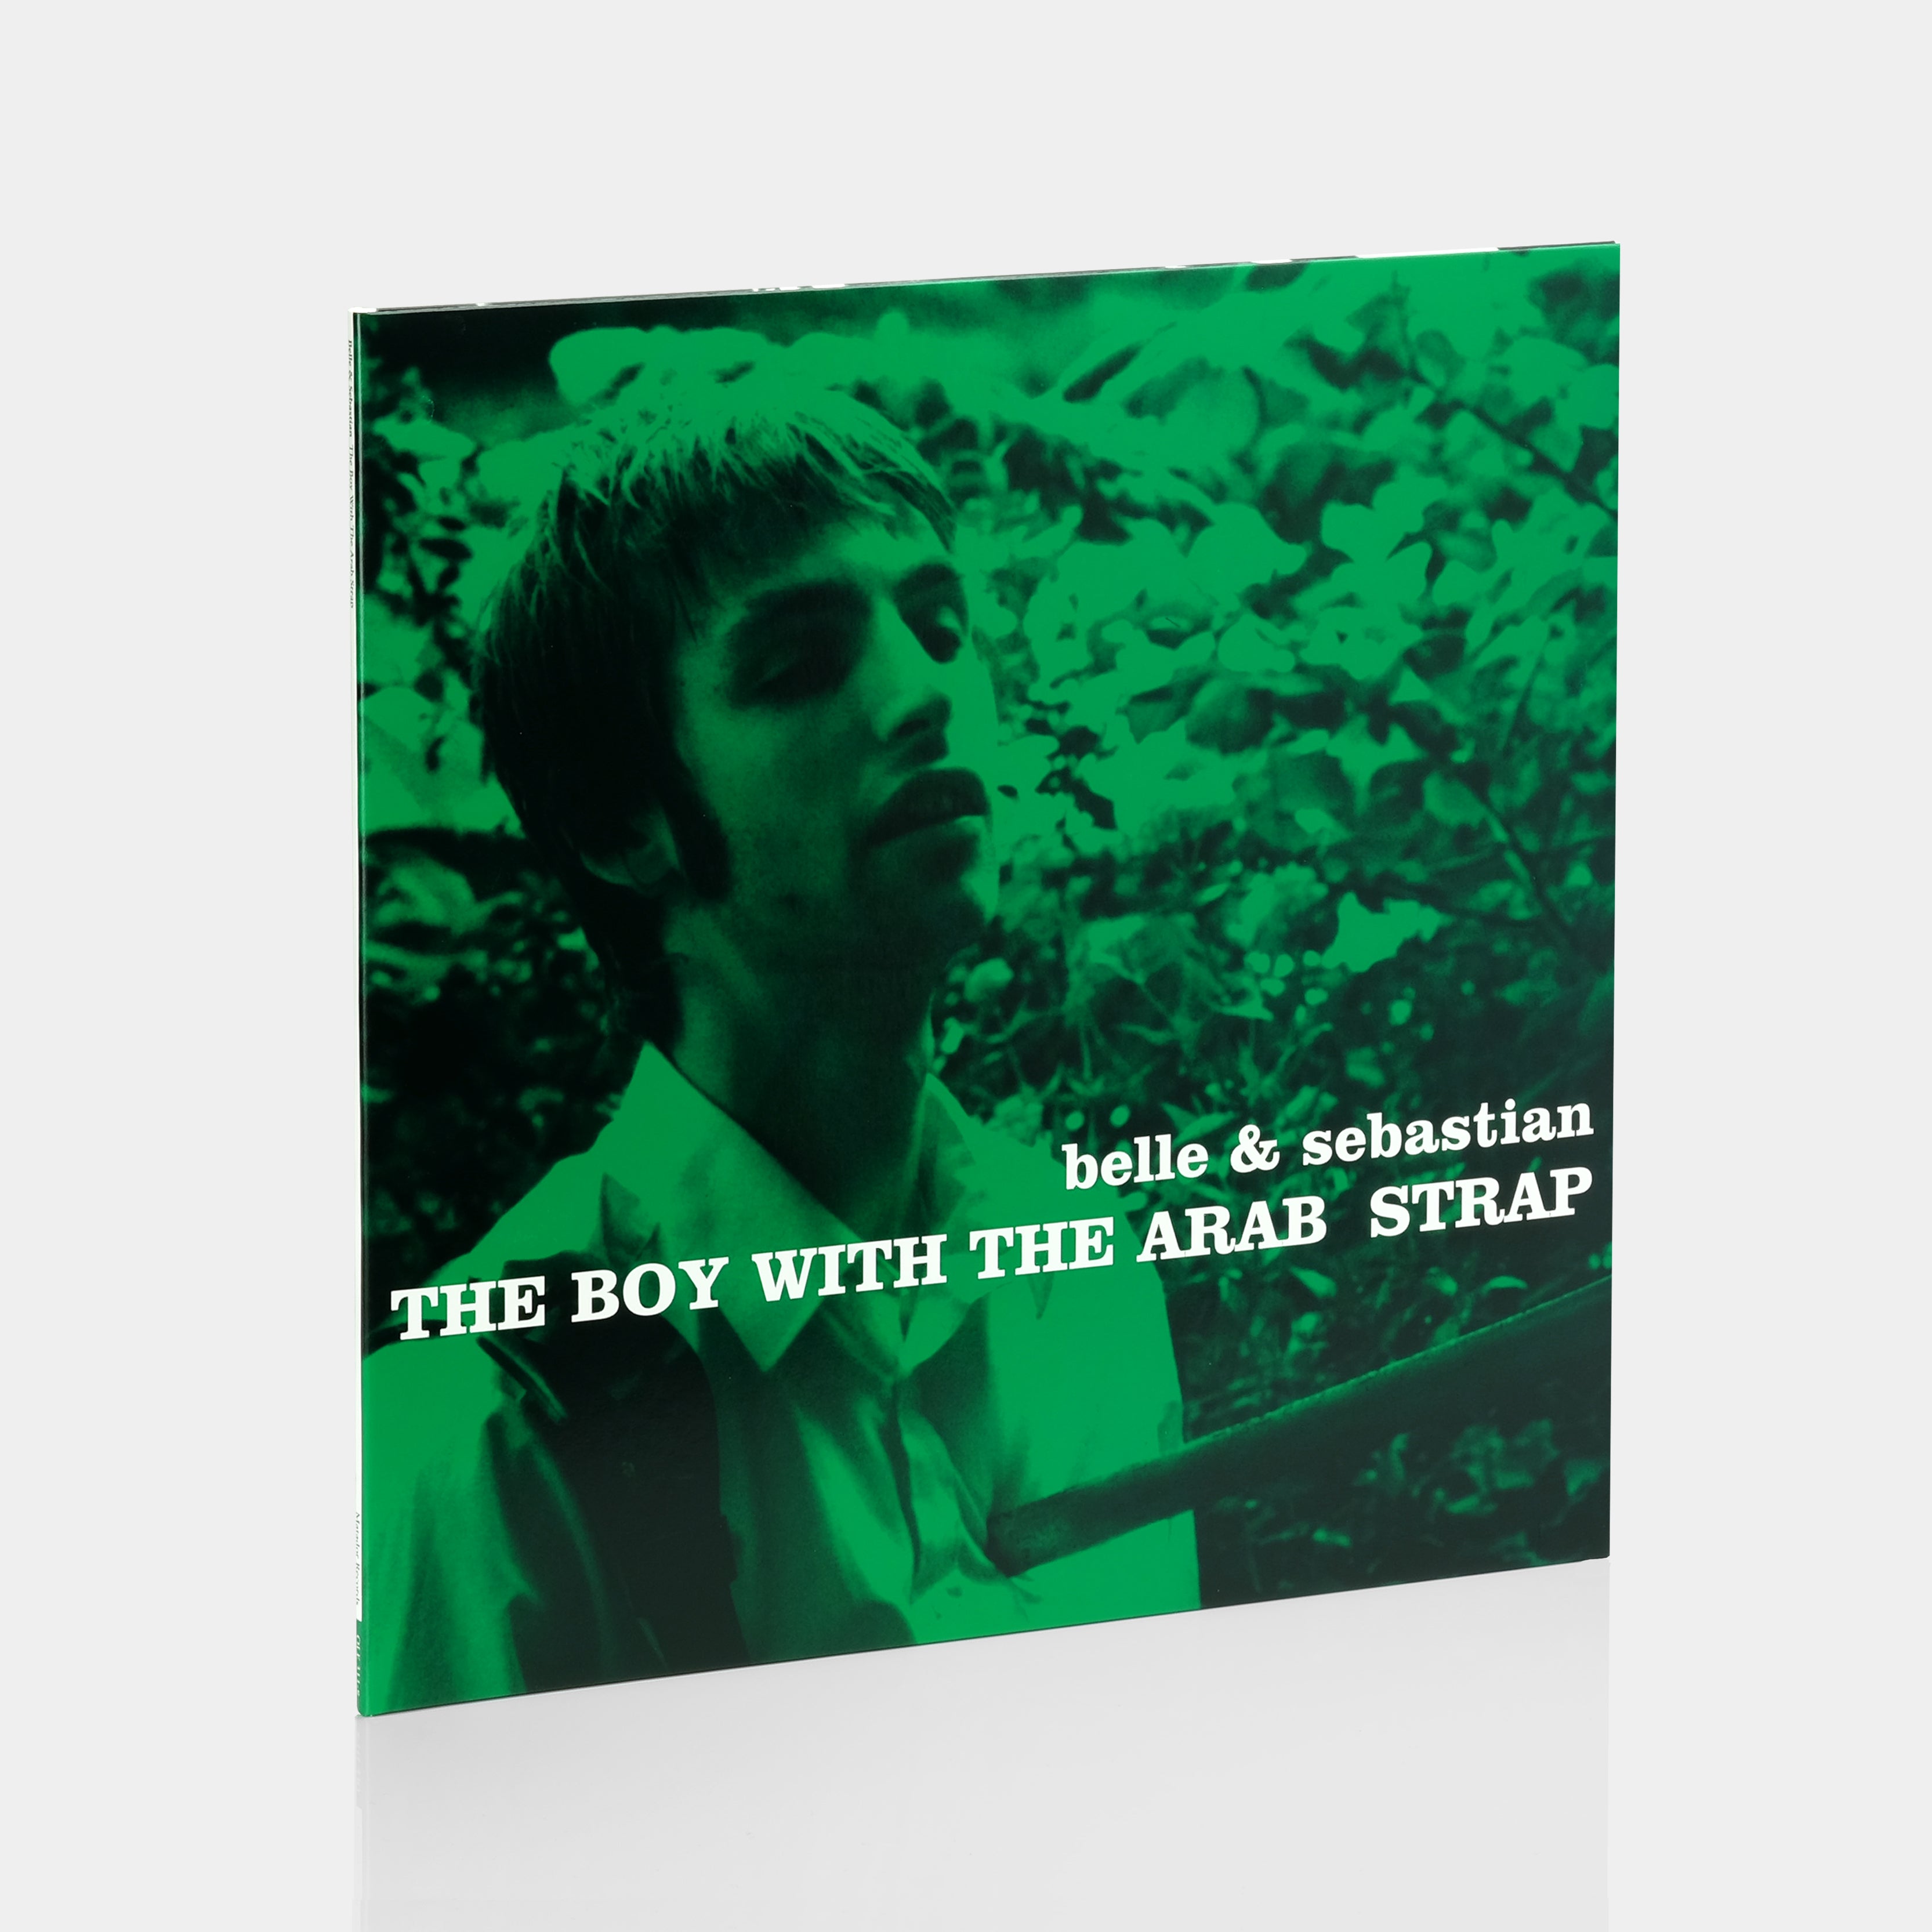 Belle And Sebastian - The Boy With The Arab Strap LP Vinyl Record